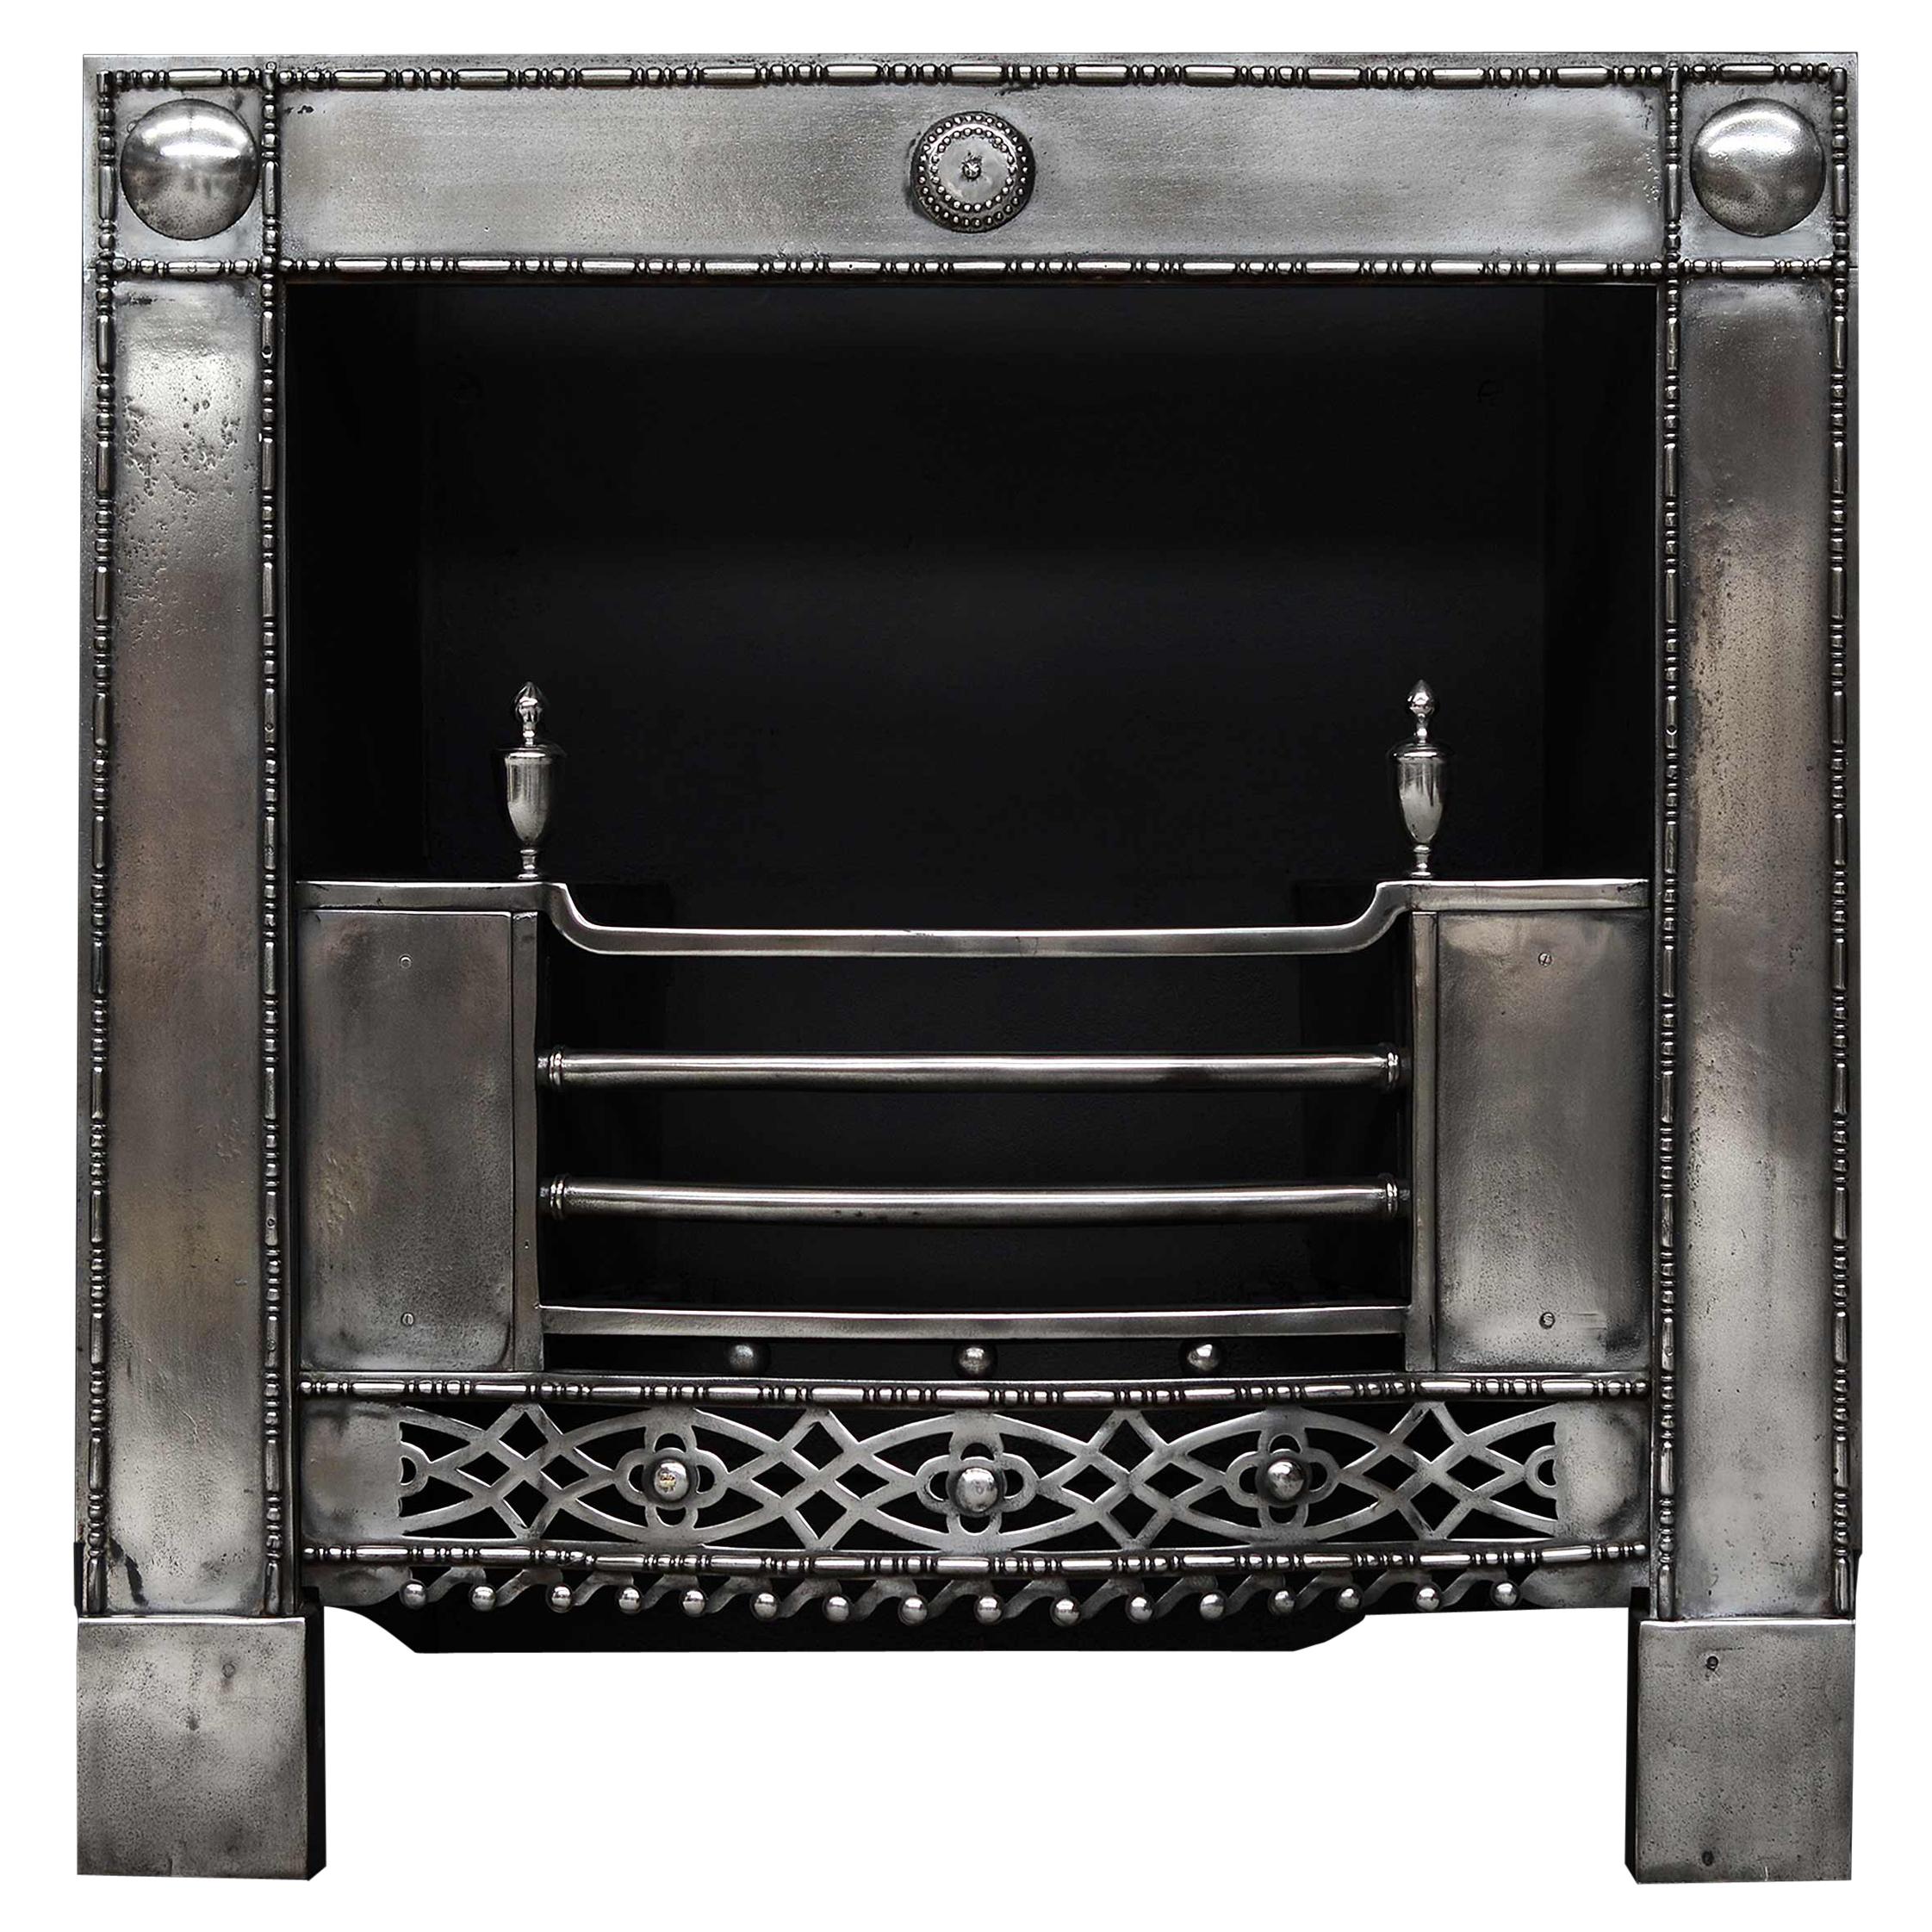 English Steel Register Grate in the Georgian Style